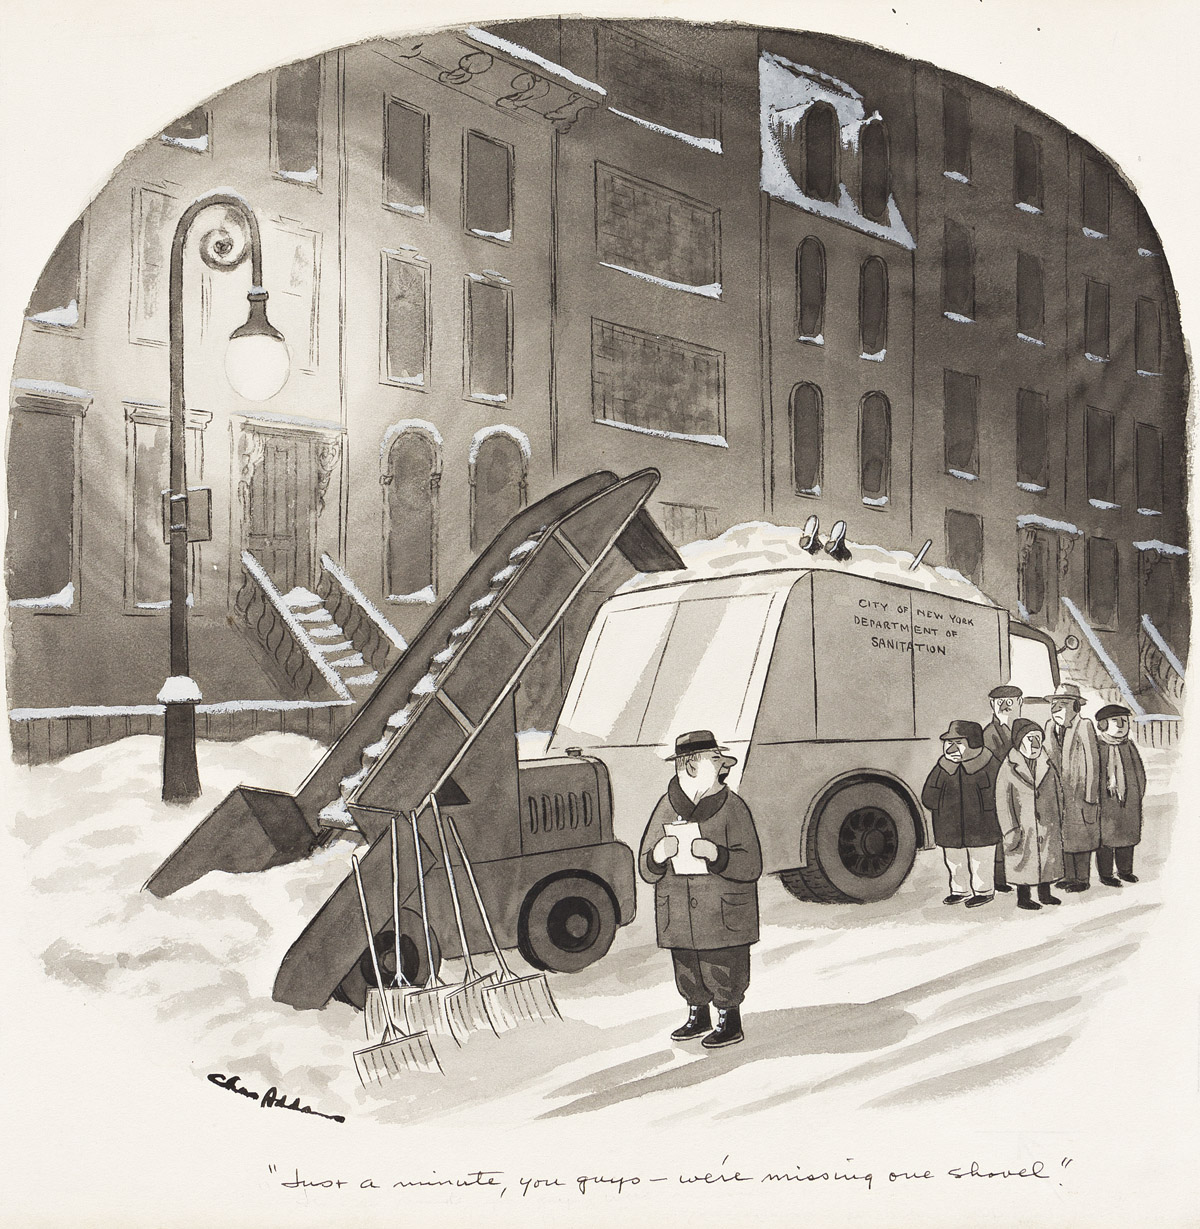 CHARLES ADDAMS (1912-1988) Just a minute, you guys - were missing one shovel. [NEW YORKER / CARTOONS]